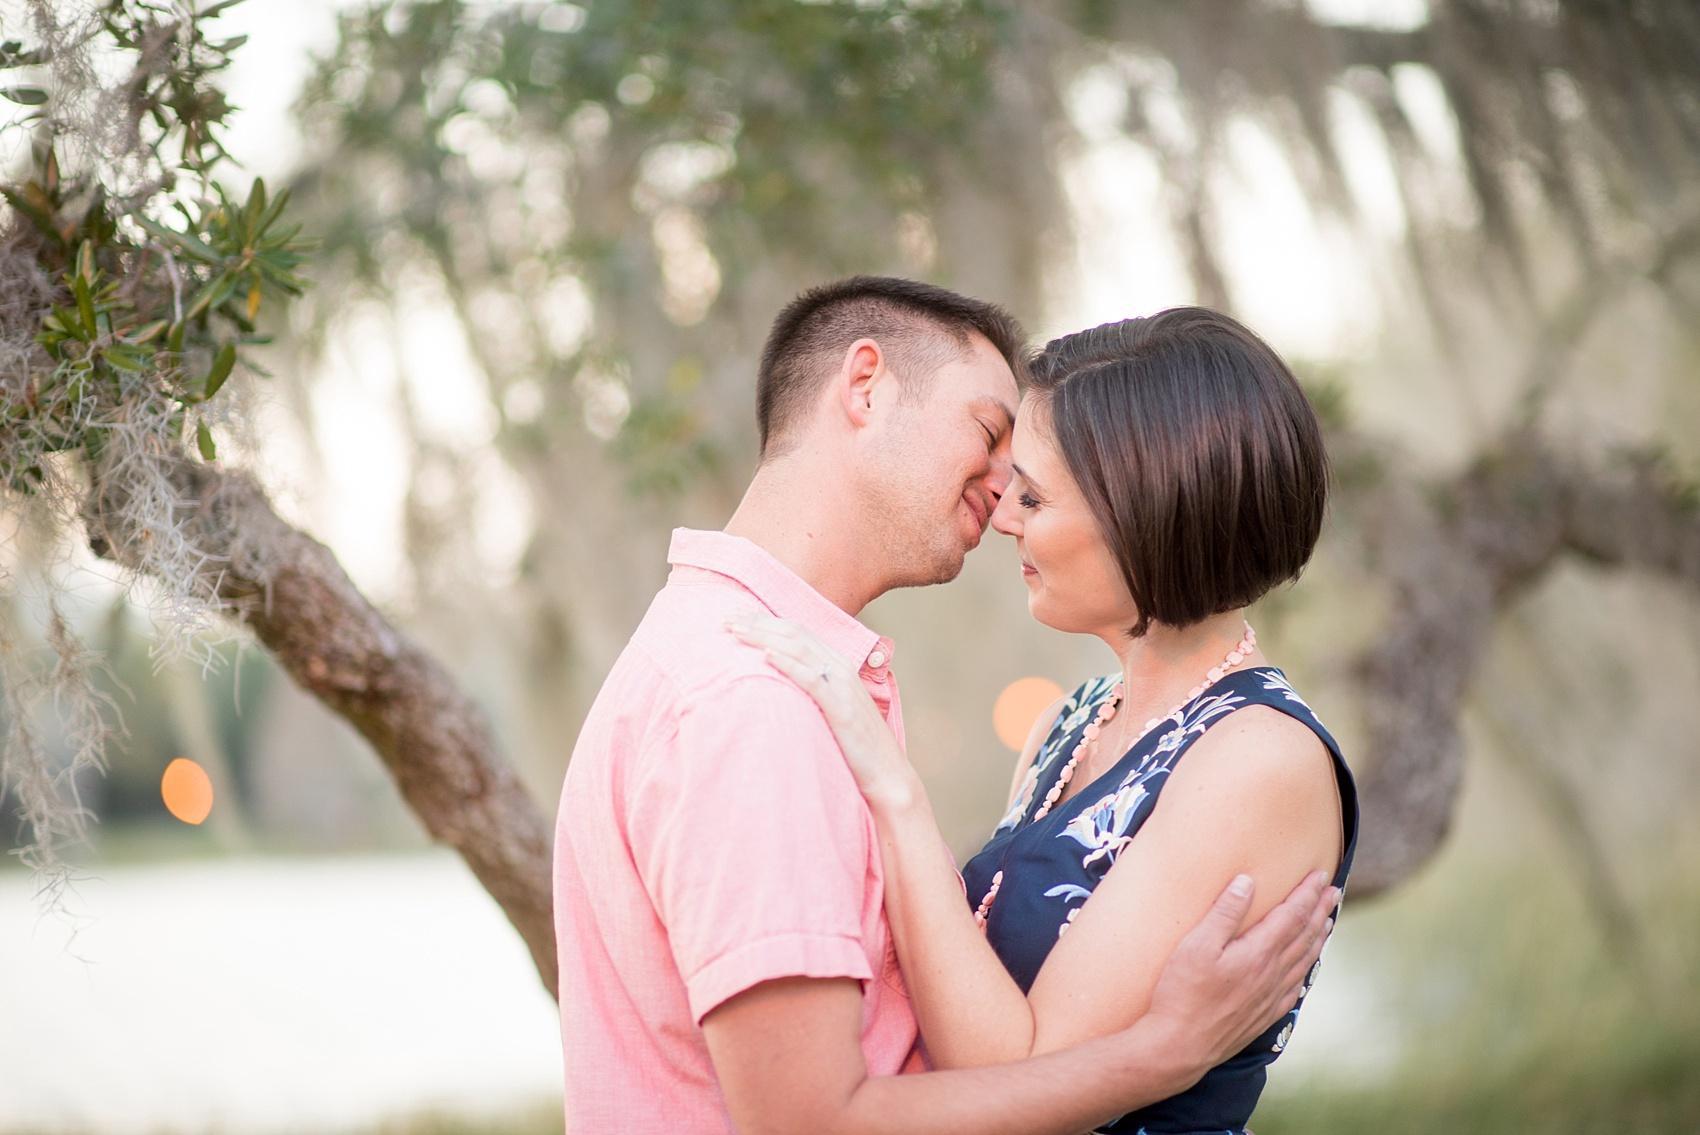 Downtown Orlando engagement photos with Spanish Moss by Mikkel Paige Photography, FL wedding photographer.